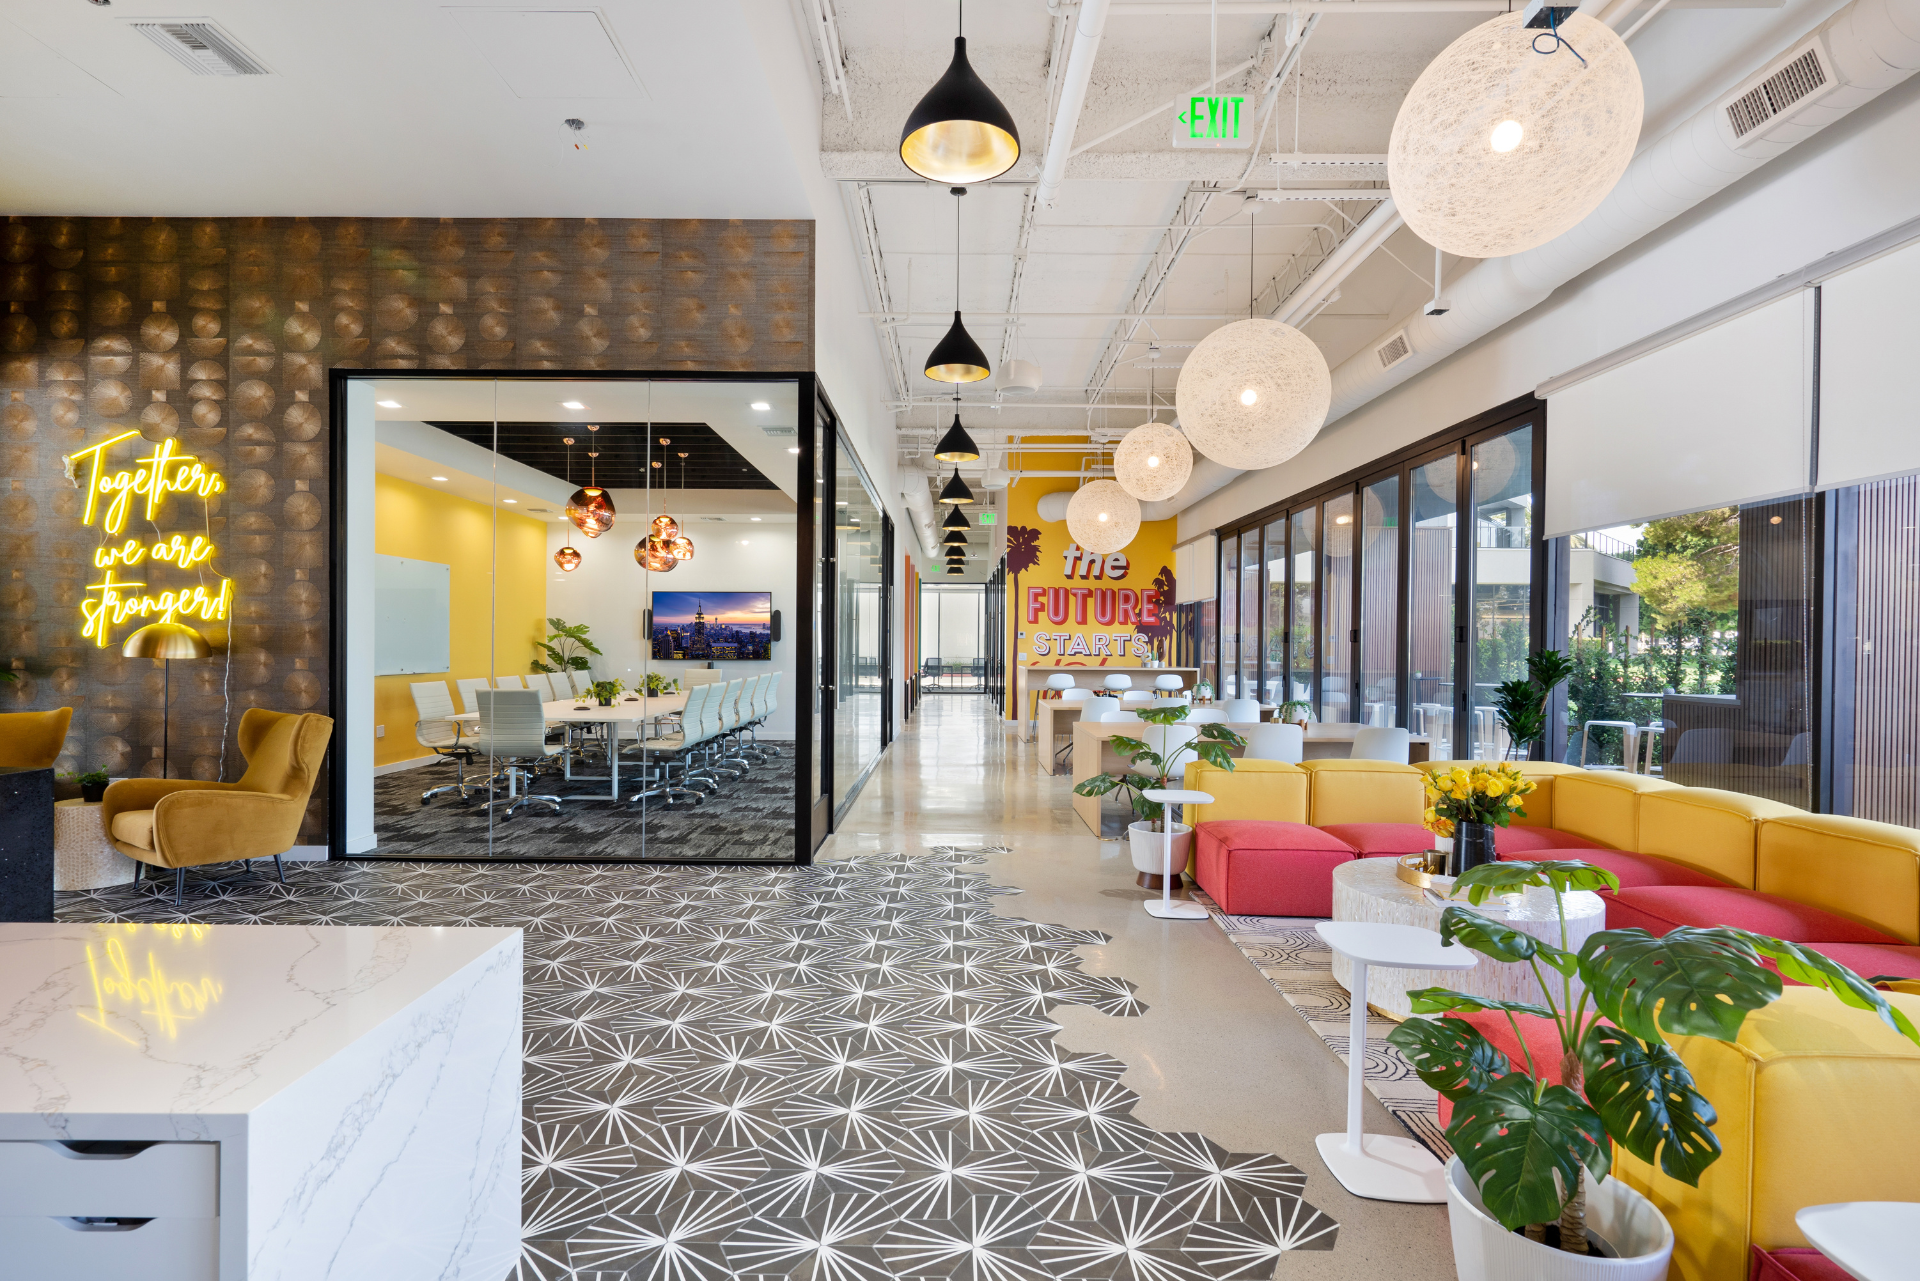 The Colab Space, a coworking space and event venue in Irvine, California